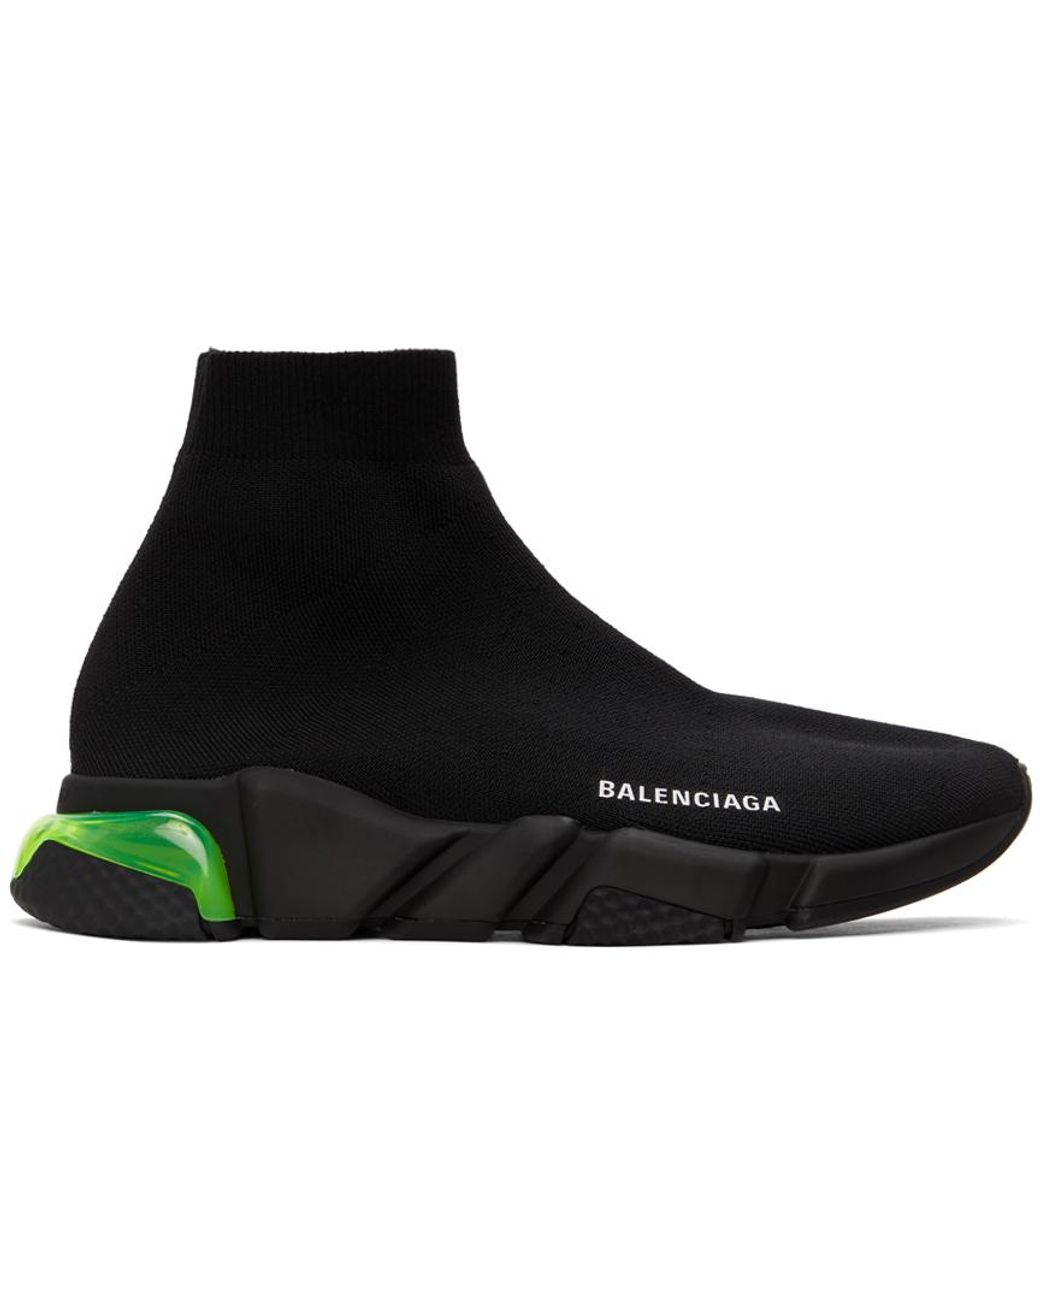 Balenciaga Black & Green Clear Sole Speed Sneakers for Men - Lyst